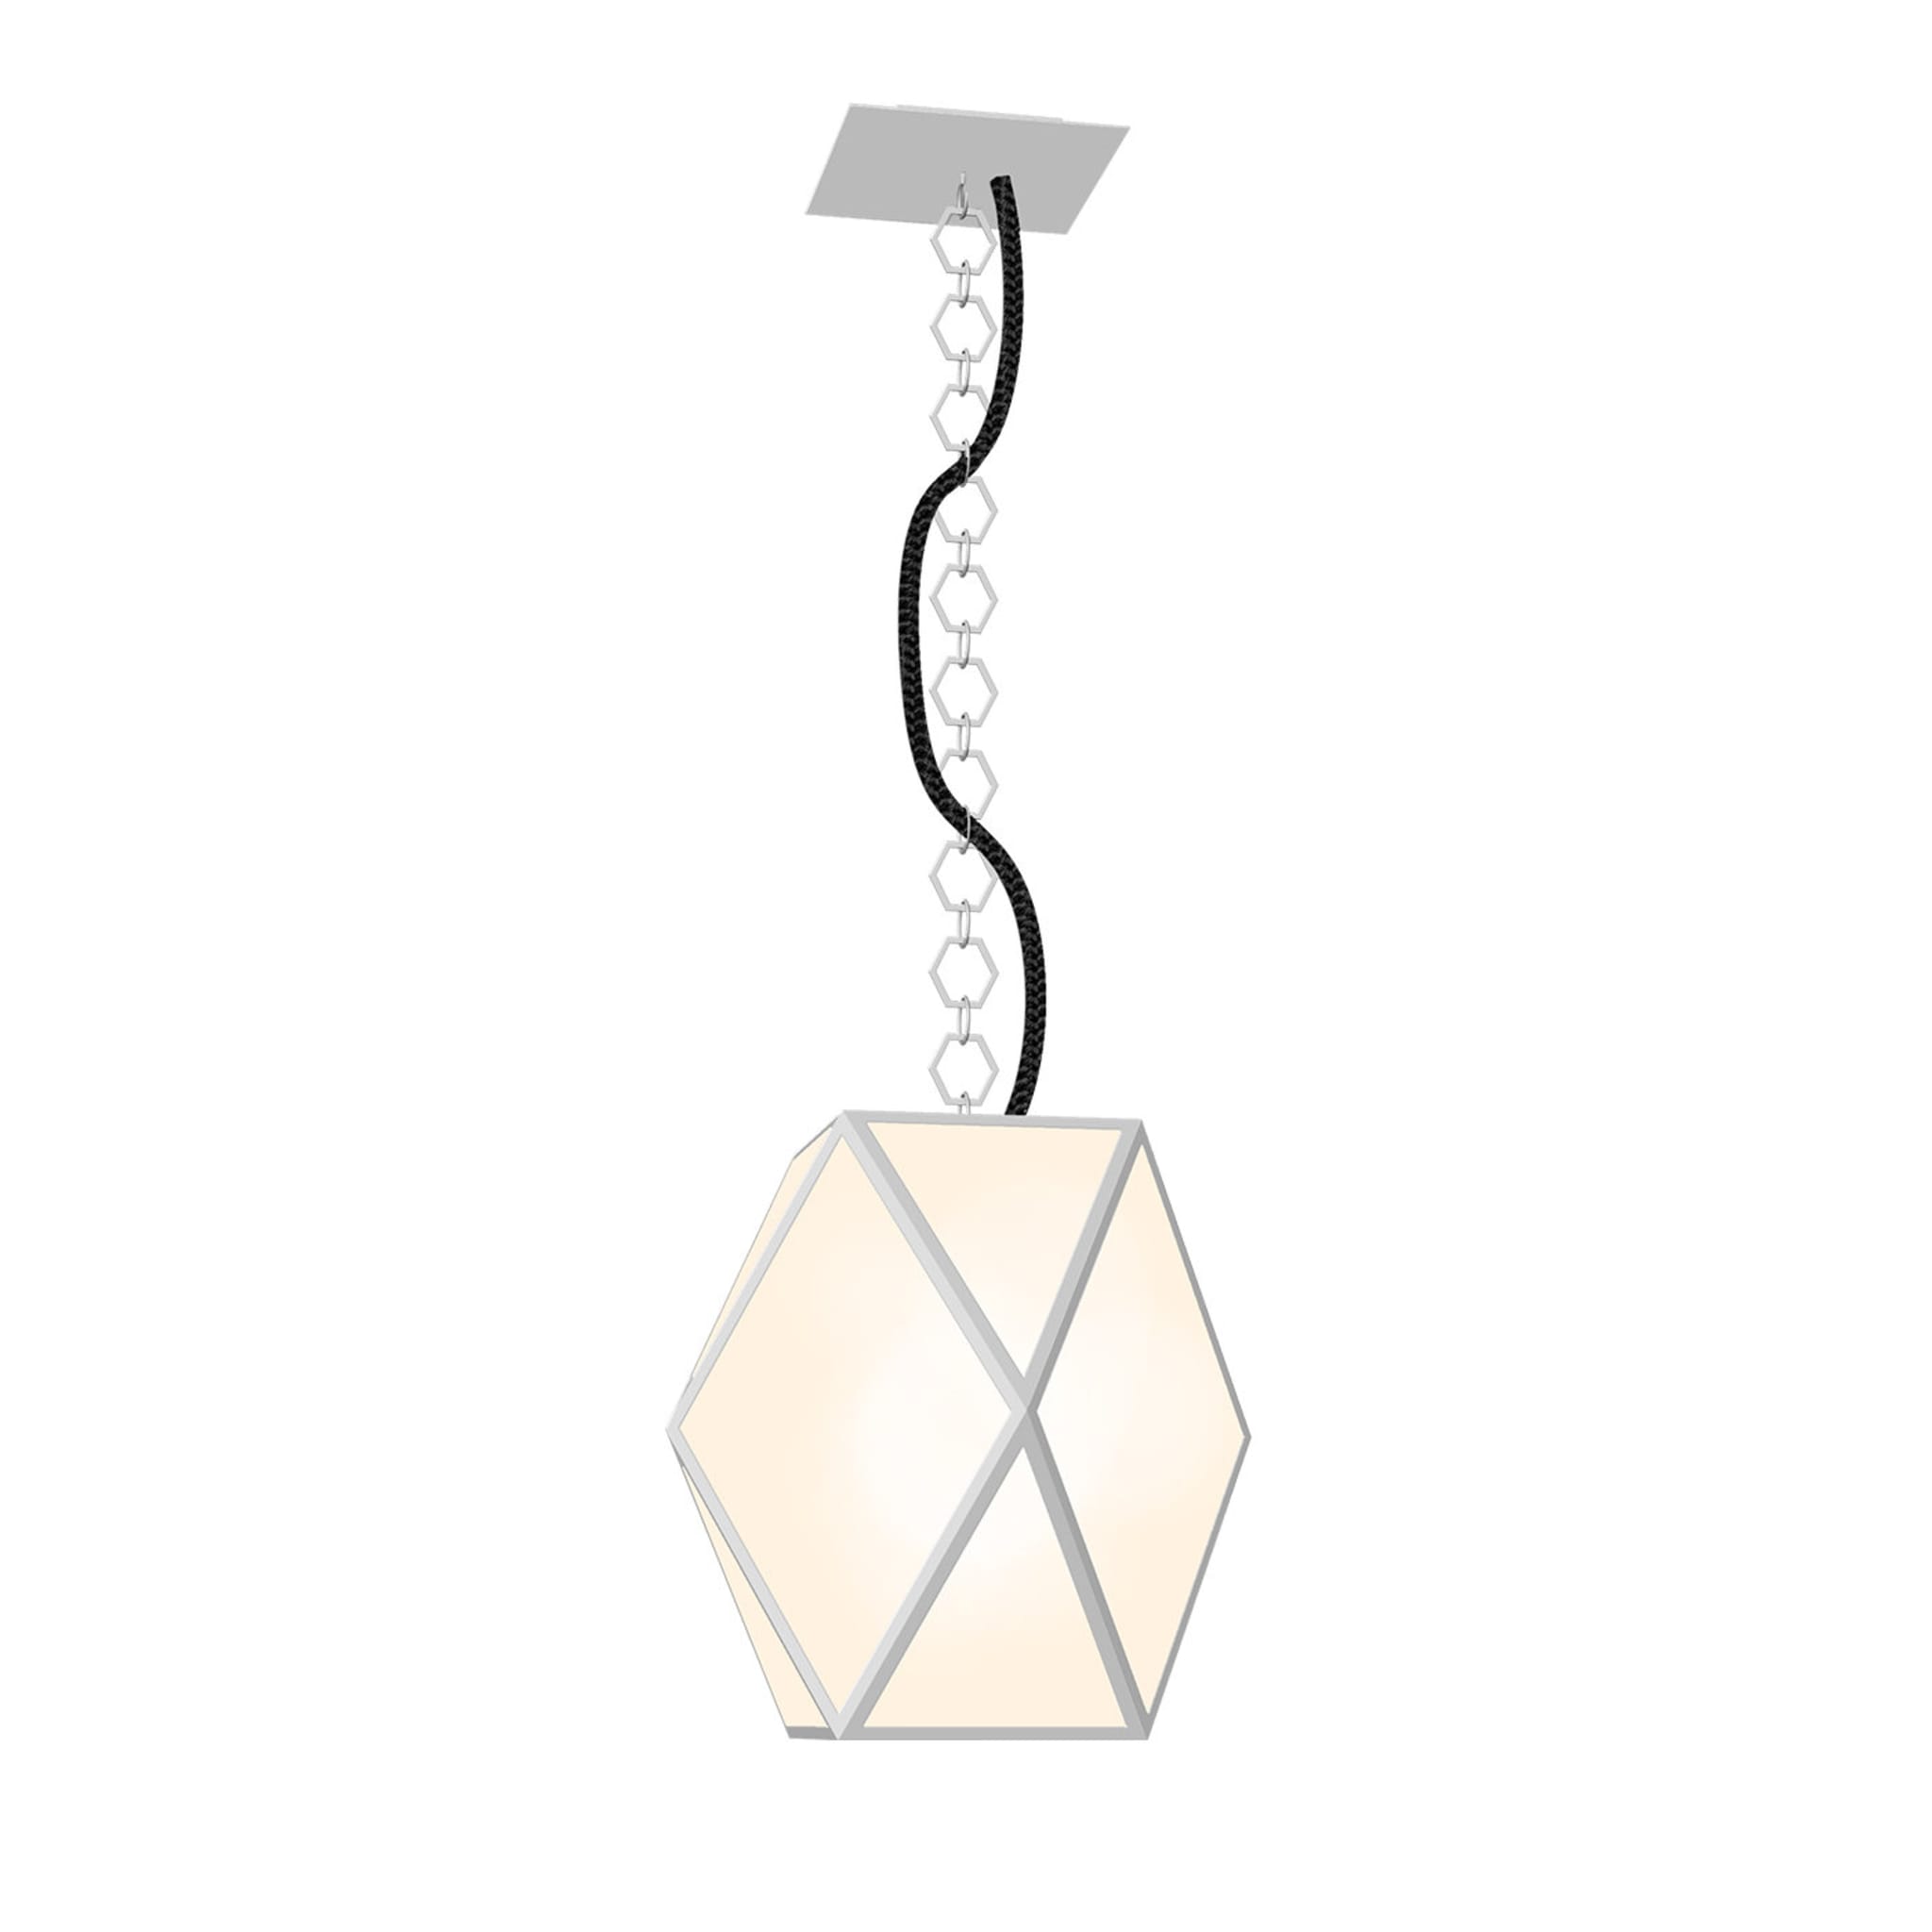 Muse Medium White Outdoor Pendant Lamp by Tristan Auer - Main view